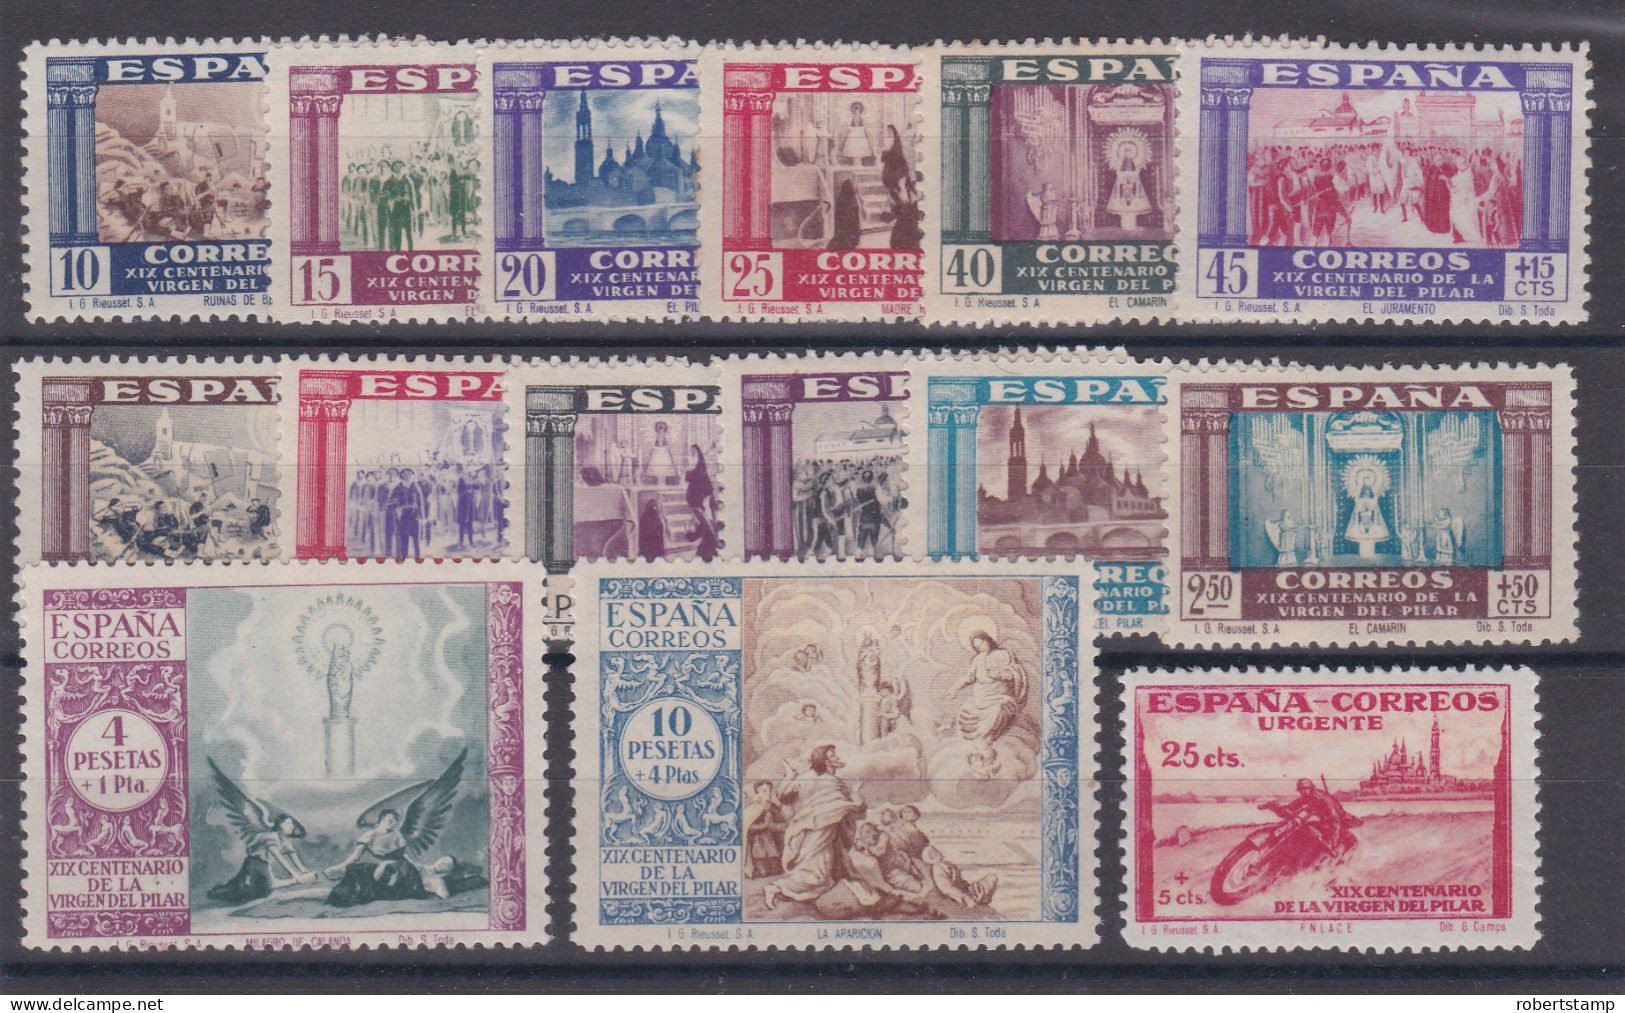 ESPAÑA 1940 - The 1900th Anniversary Of The Appearance Of The Virgin Of Pillar Edifil 889/903* -MLH- - Ungebraucht